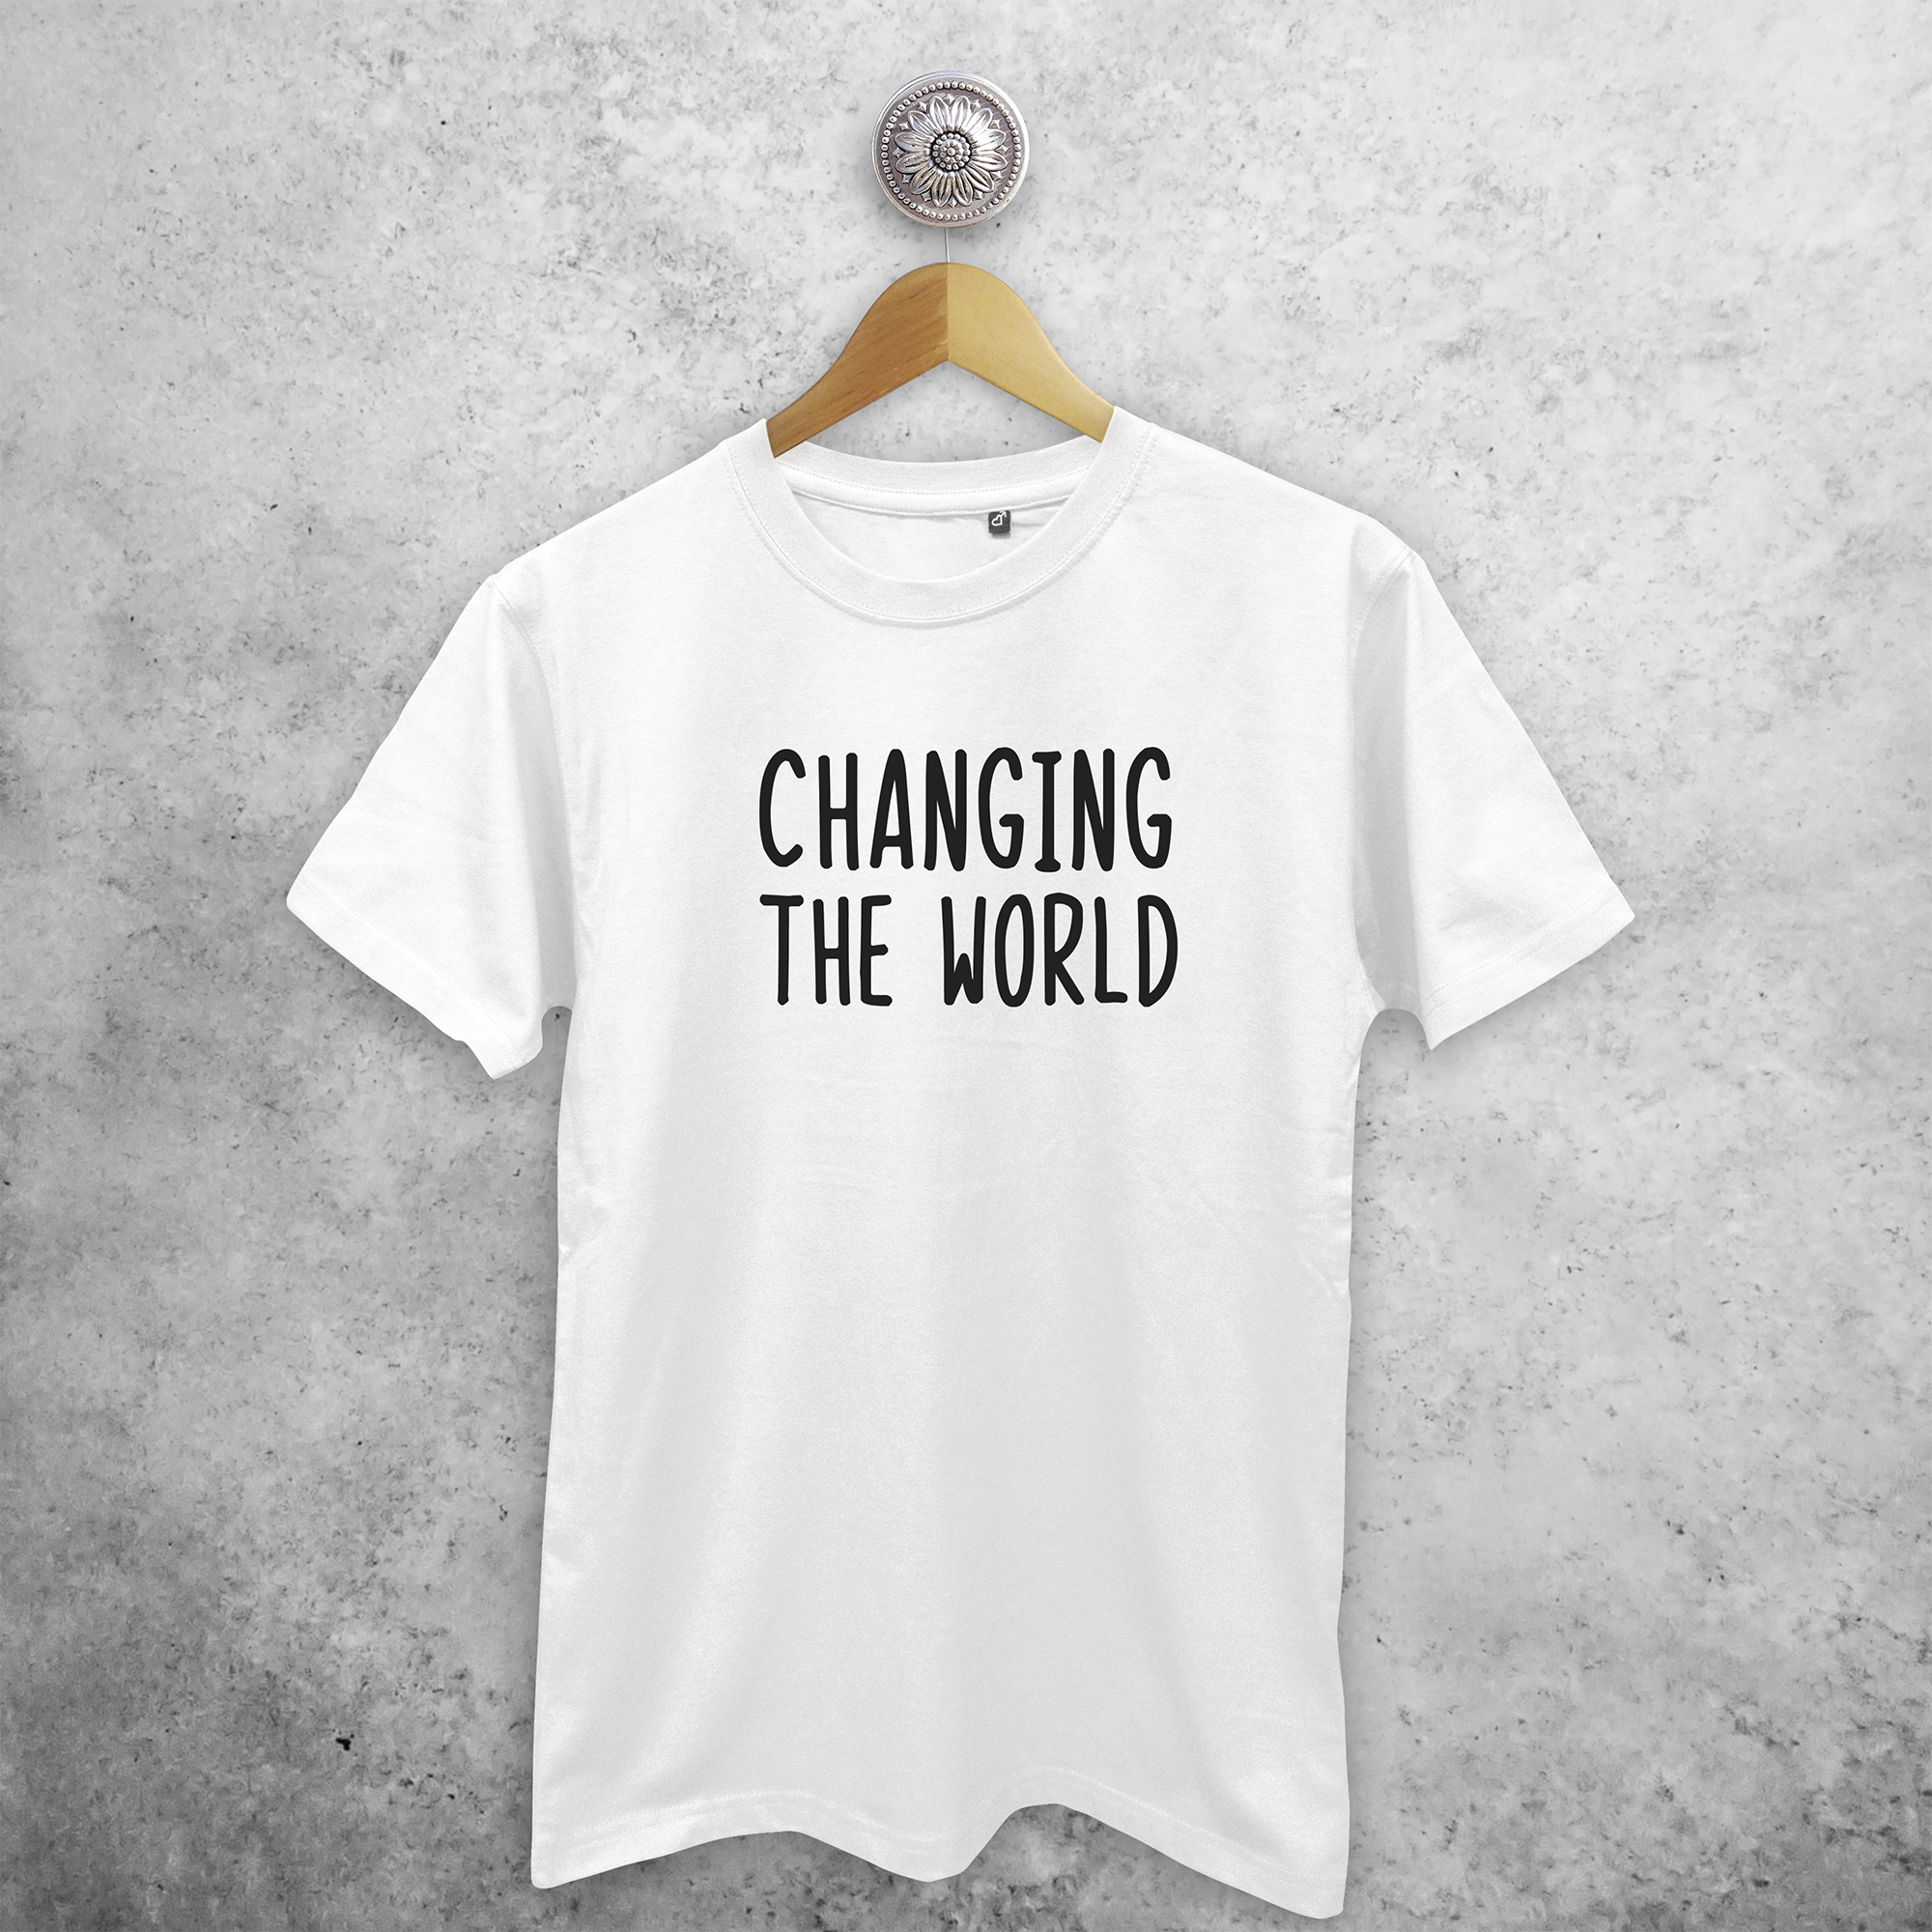 'Changing the world' adult shirt